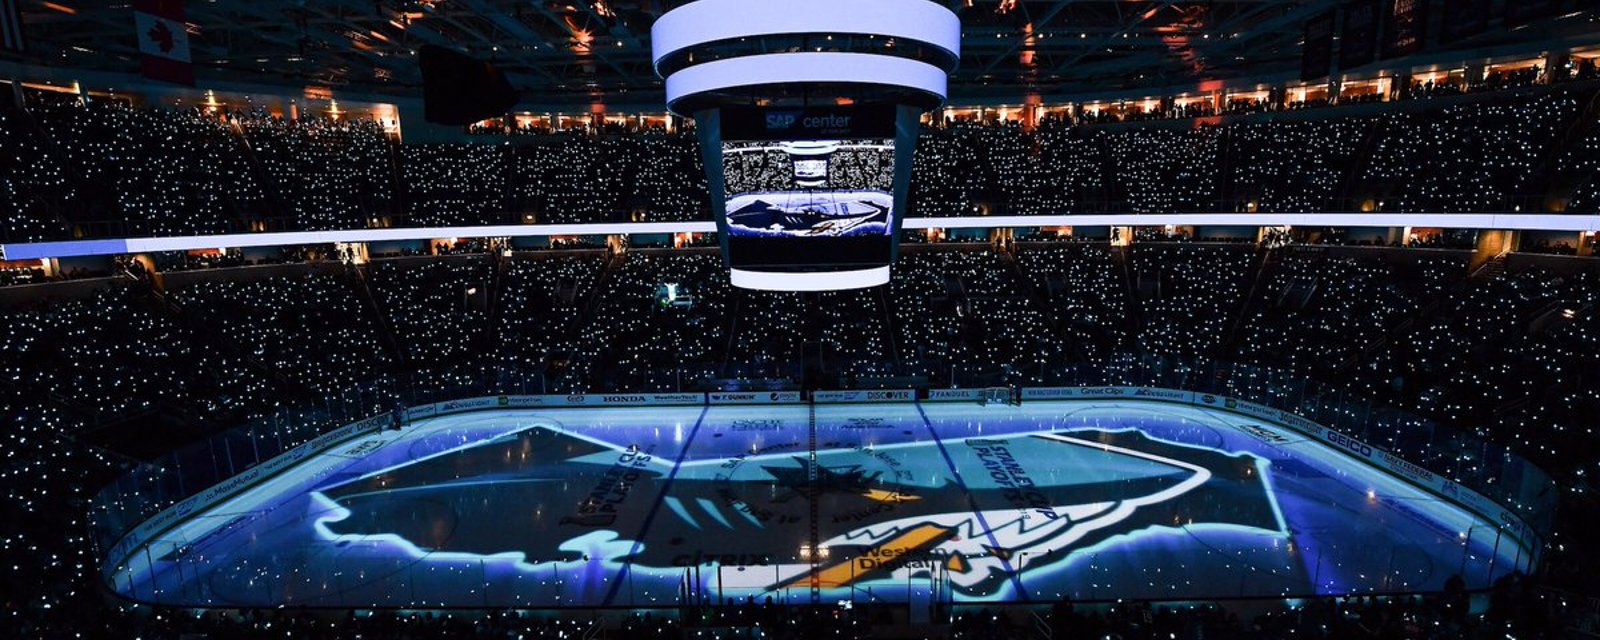 Sharks forced out of their arena for scheduled home opener 